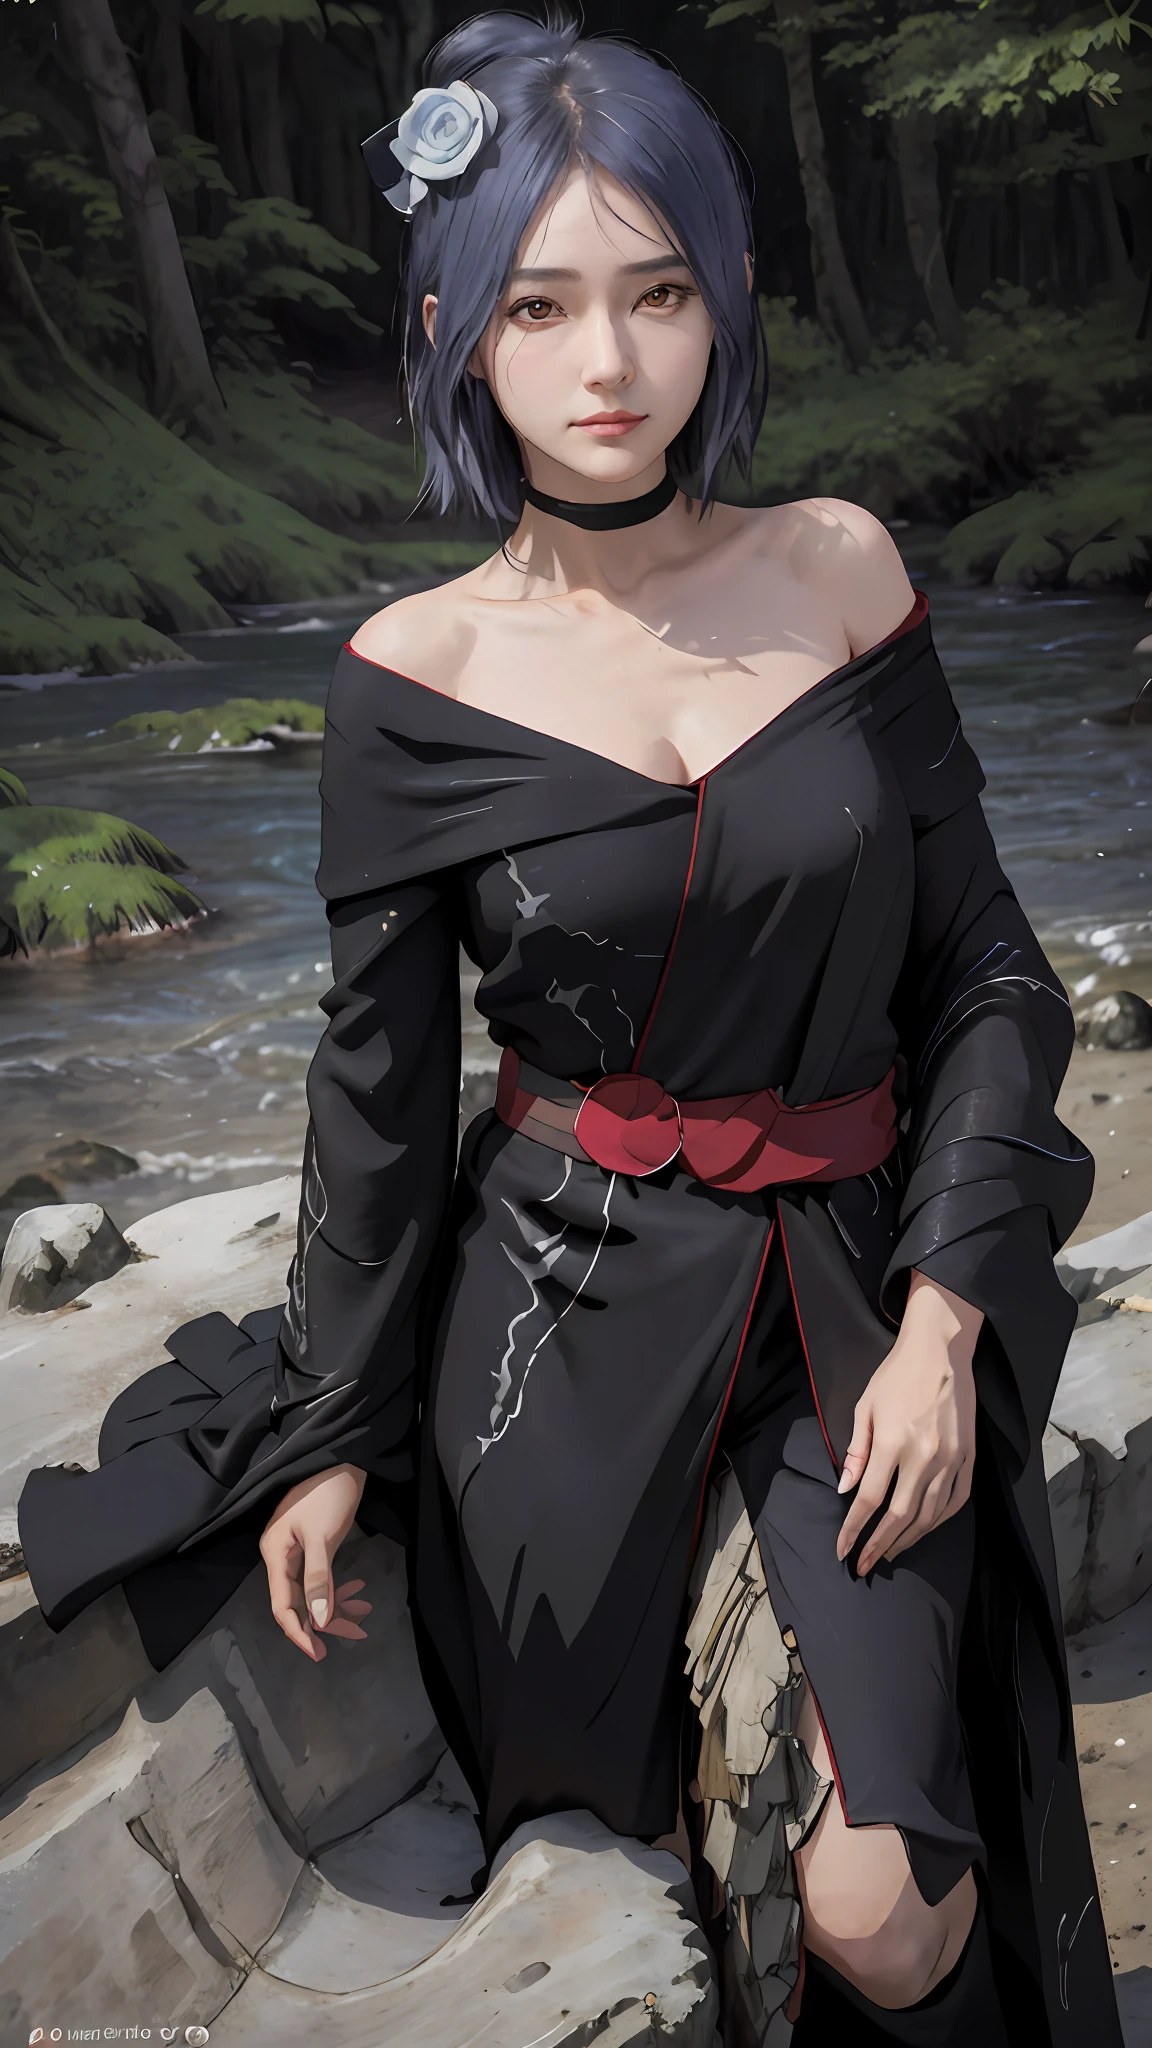 "tmasterpiece，Best Picture Quality，solo person，Off-the-shoulder clothing，staring right into camera，Reddening cheeks，ssmile，largeeyes，close lens，the ocean，sea beach，In the forest，Black robe，Akatsuki suit，Naruto，Xiaonan